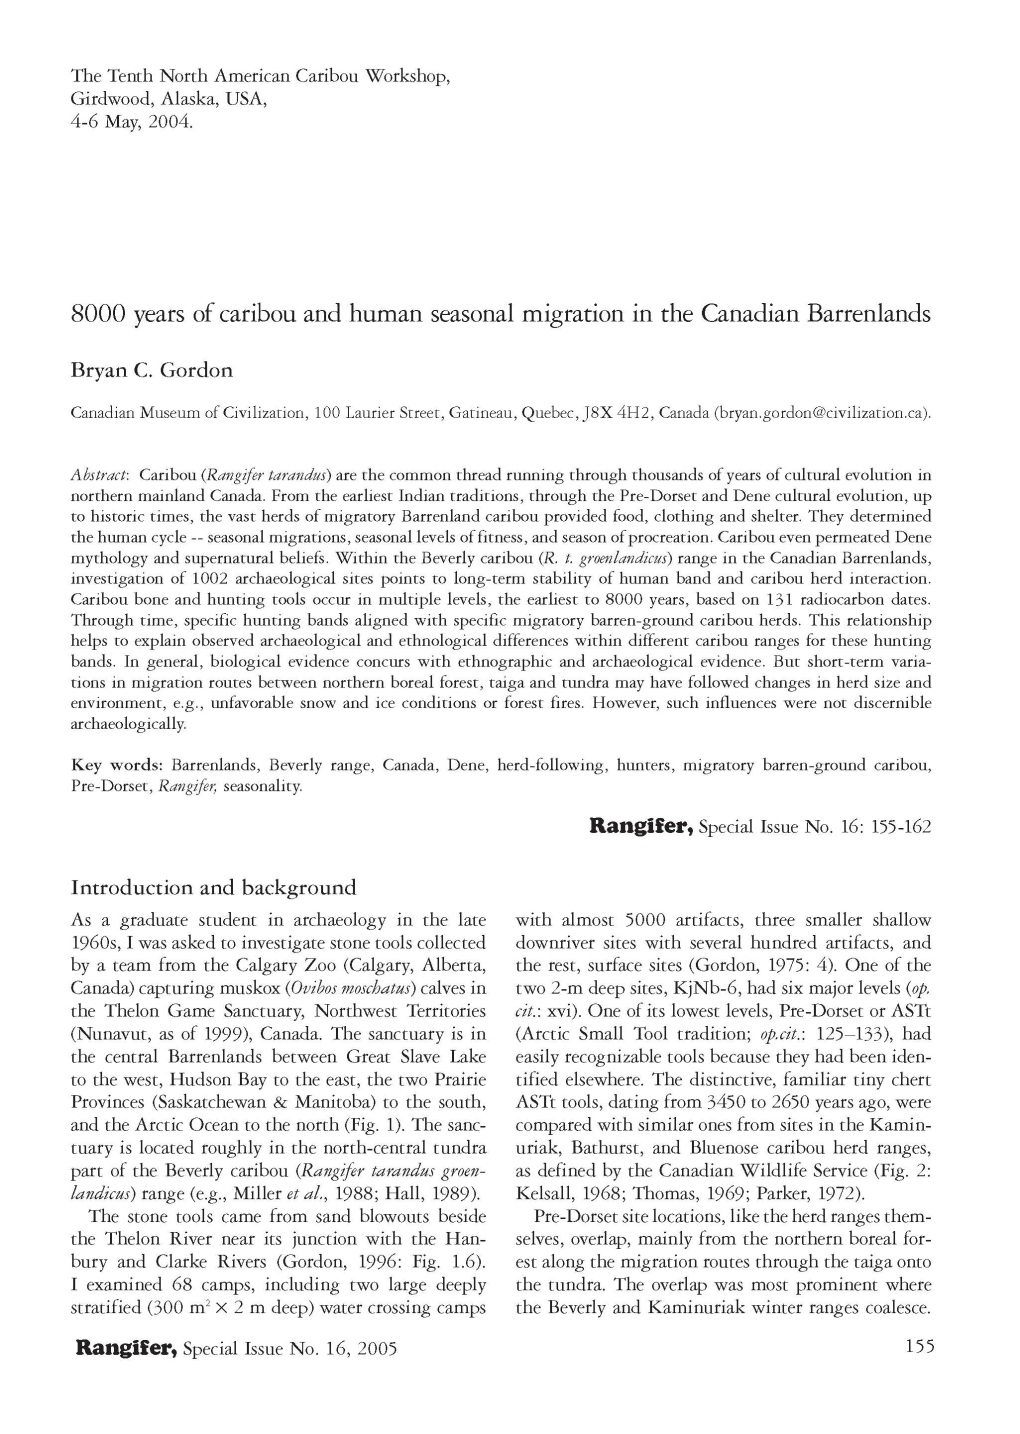 8000 Years of Caribou and Human Seasonal Migration in the Canadian Barrenlands